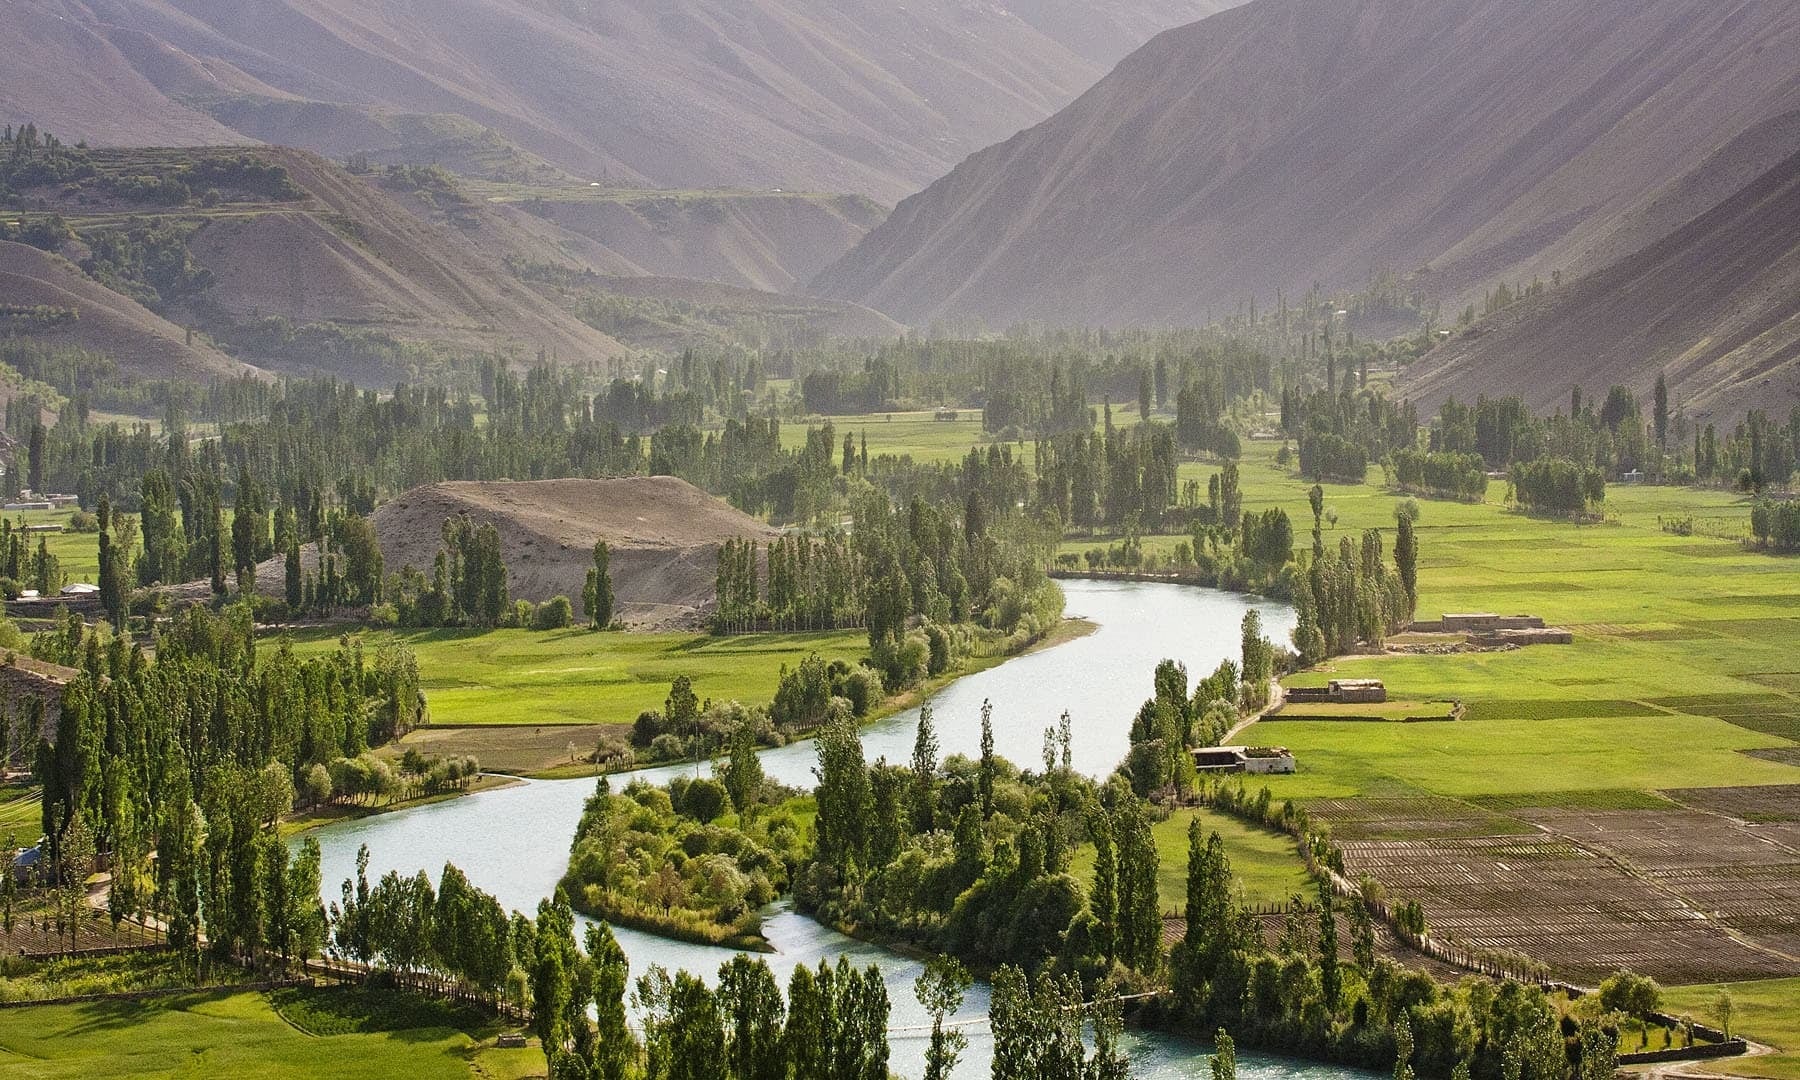 Ghizer valley